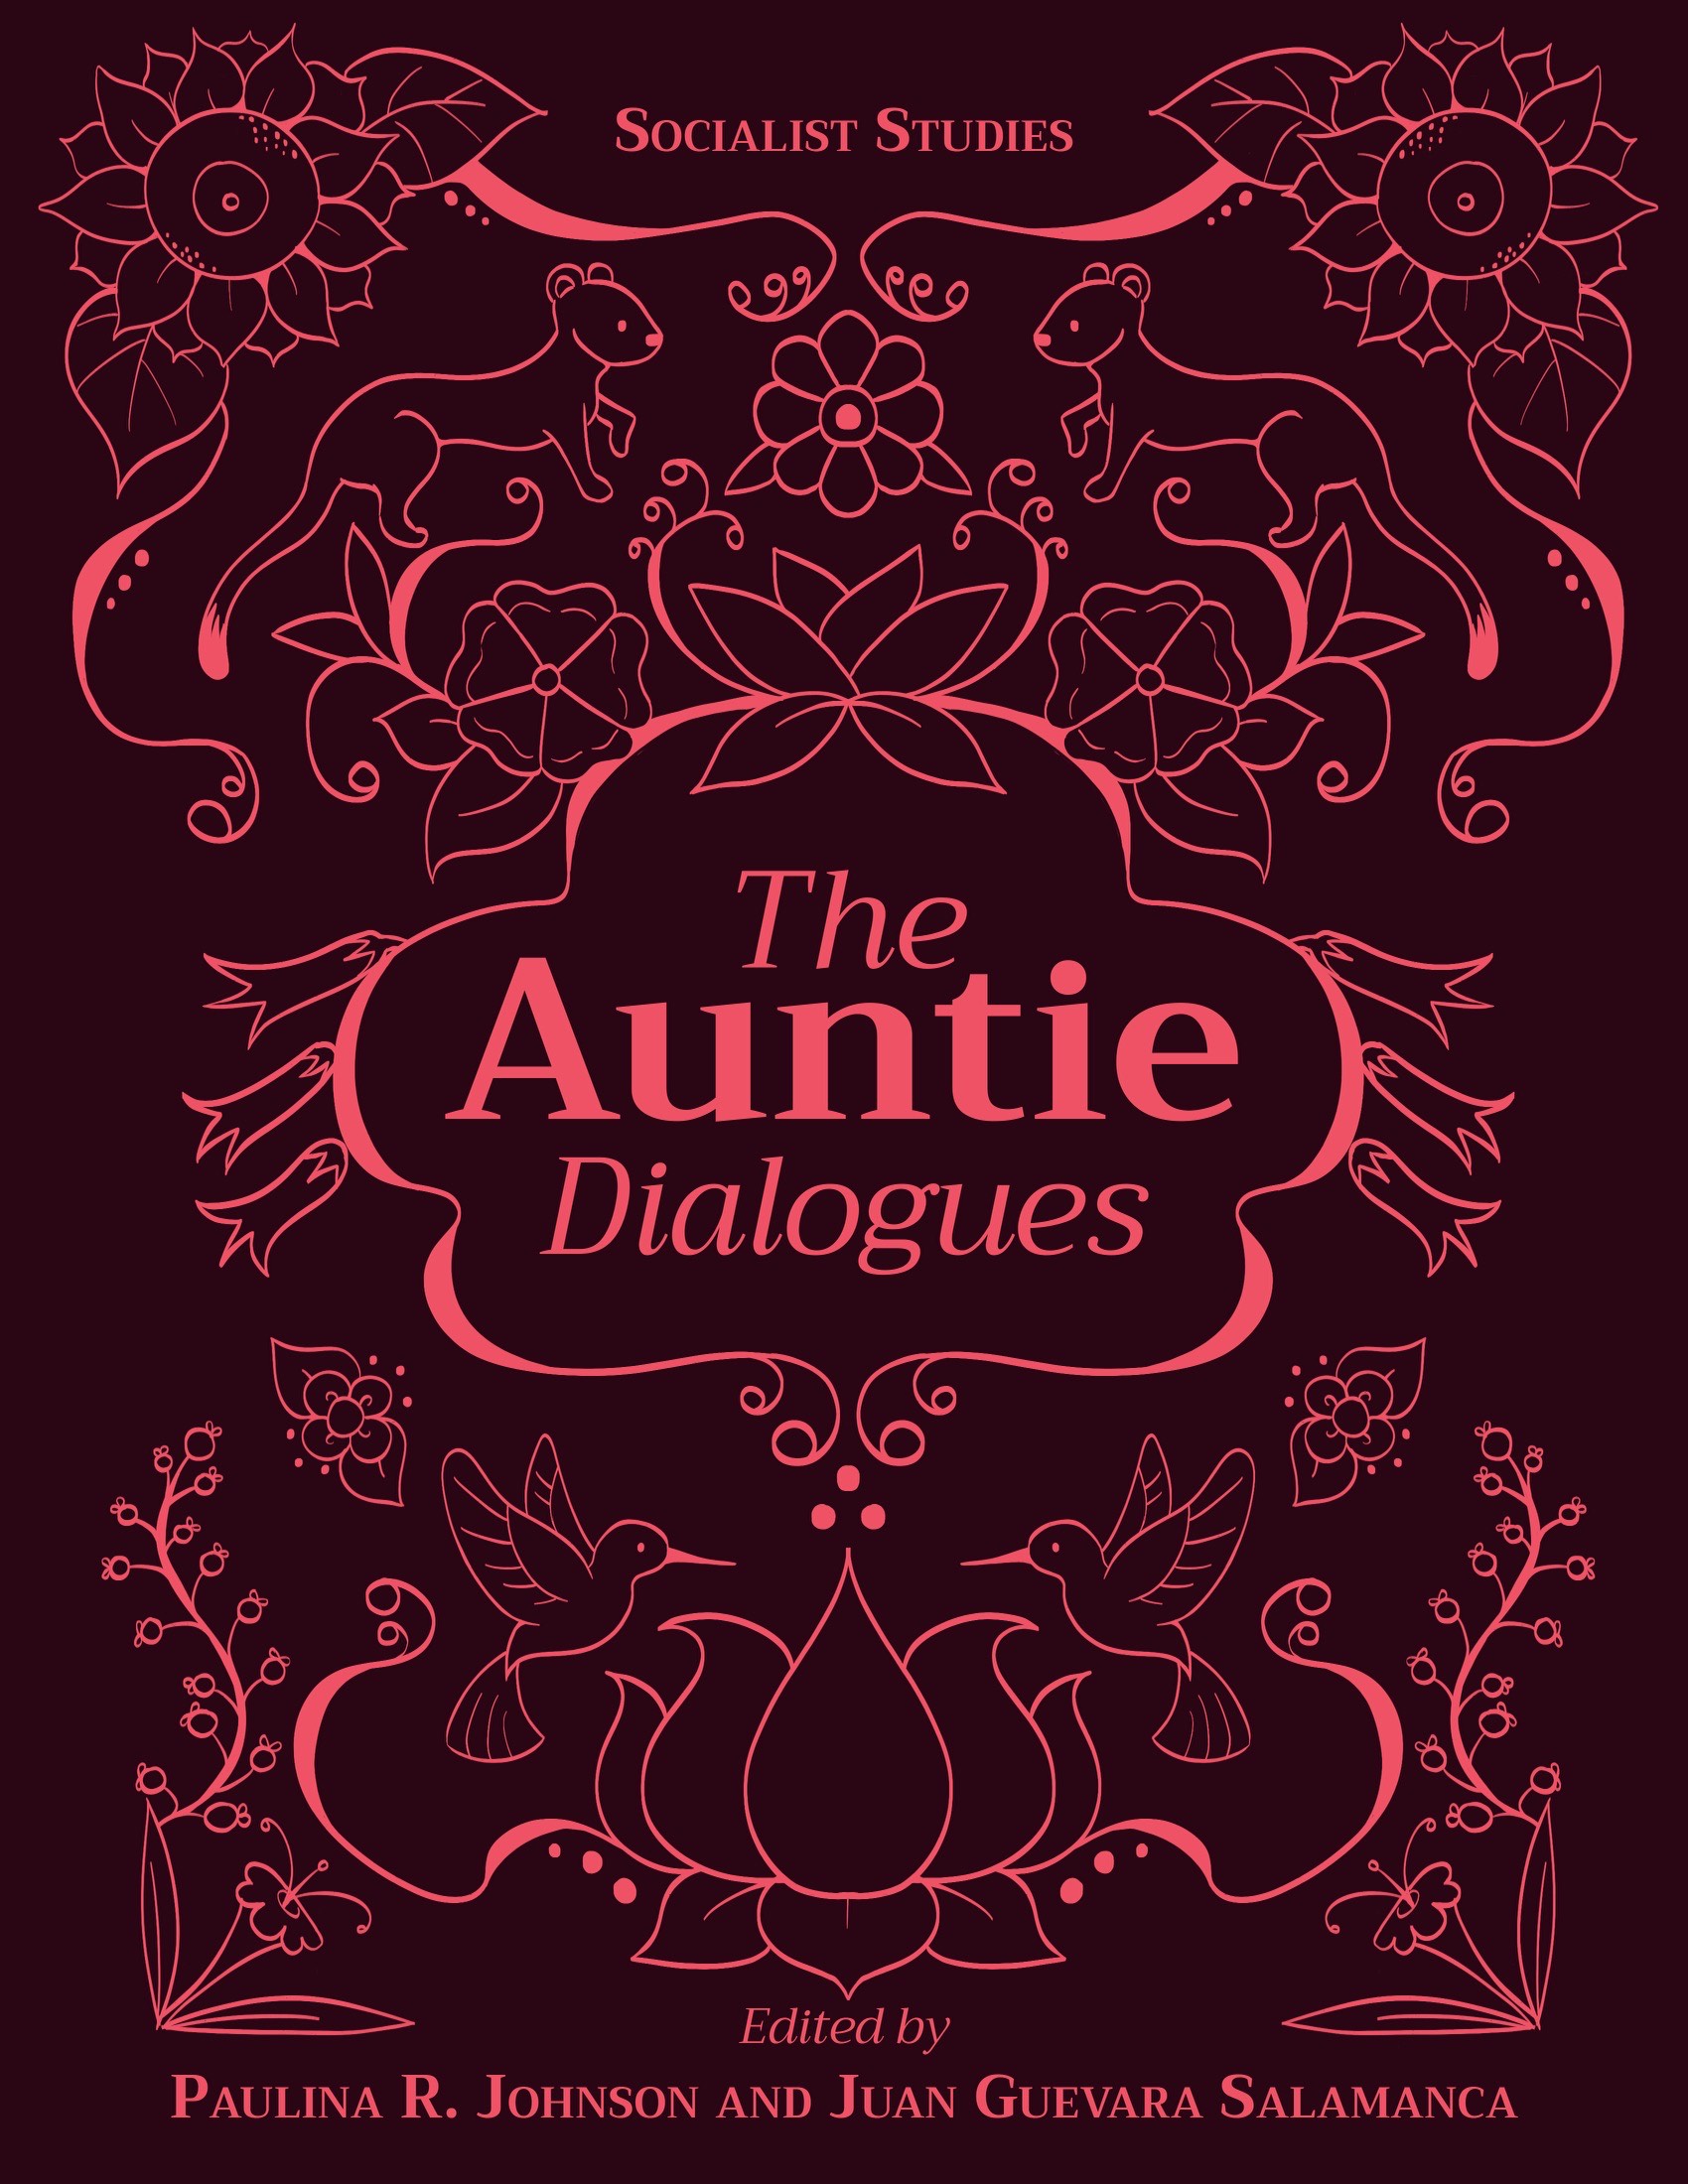 Front cover of the Auntie Dialogues with beautiful traditional designs that includes flowers and animals.